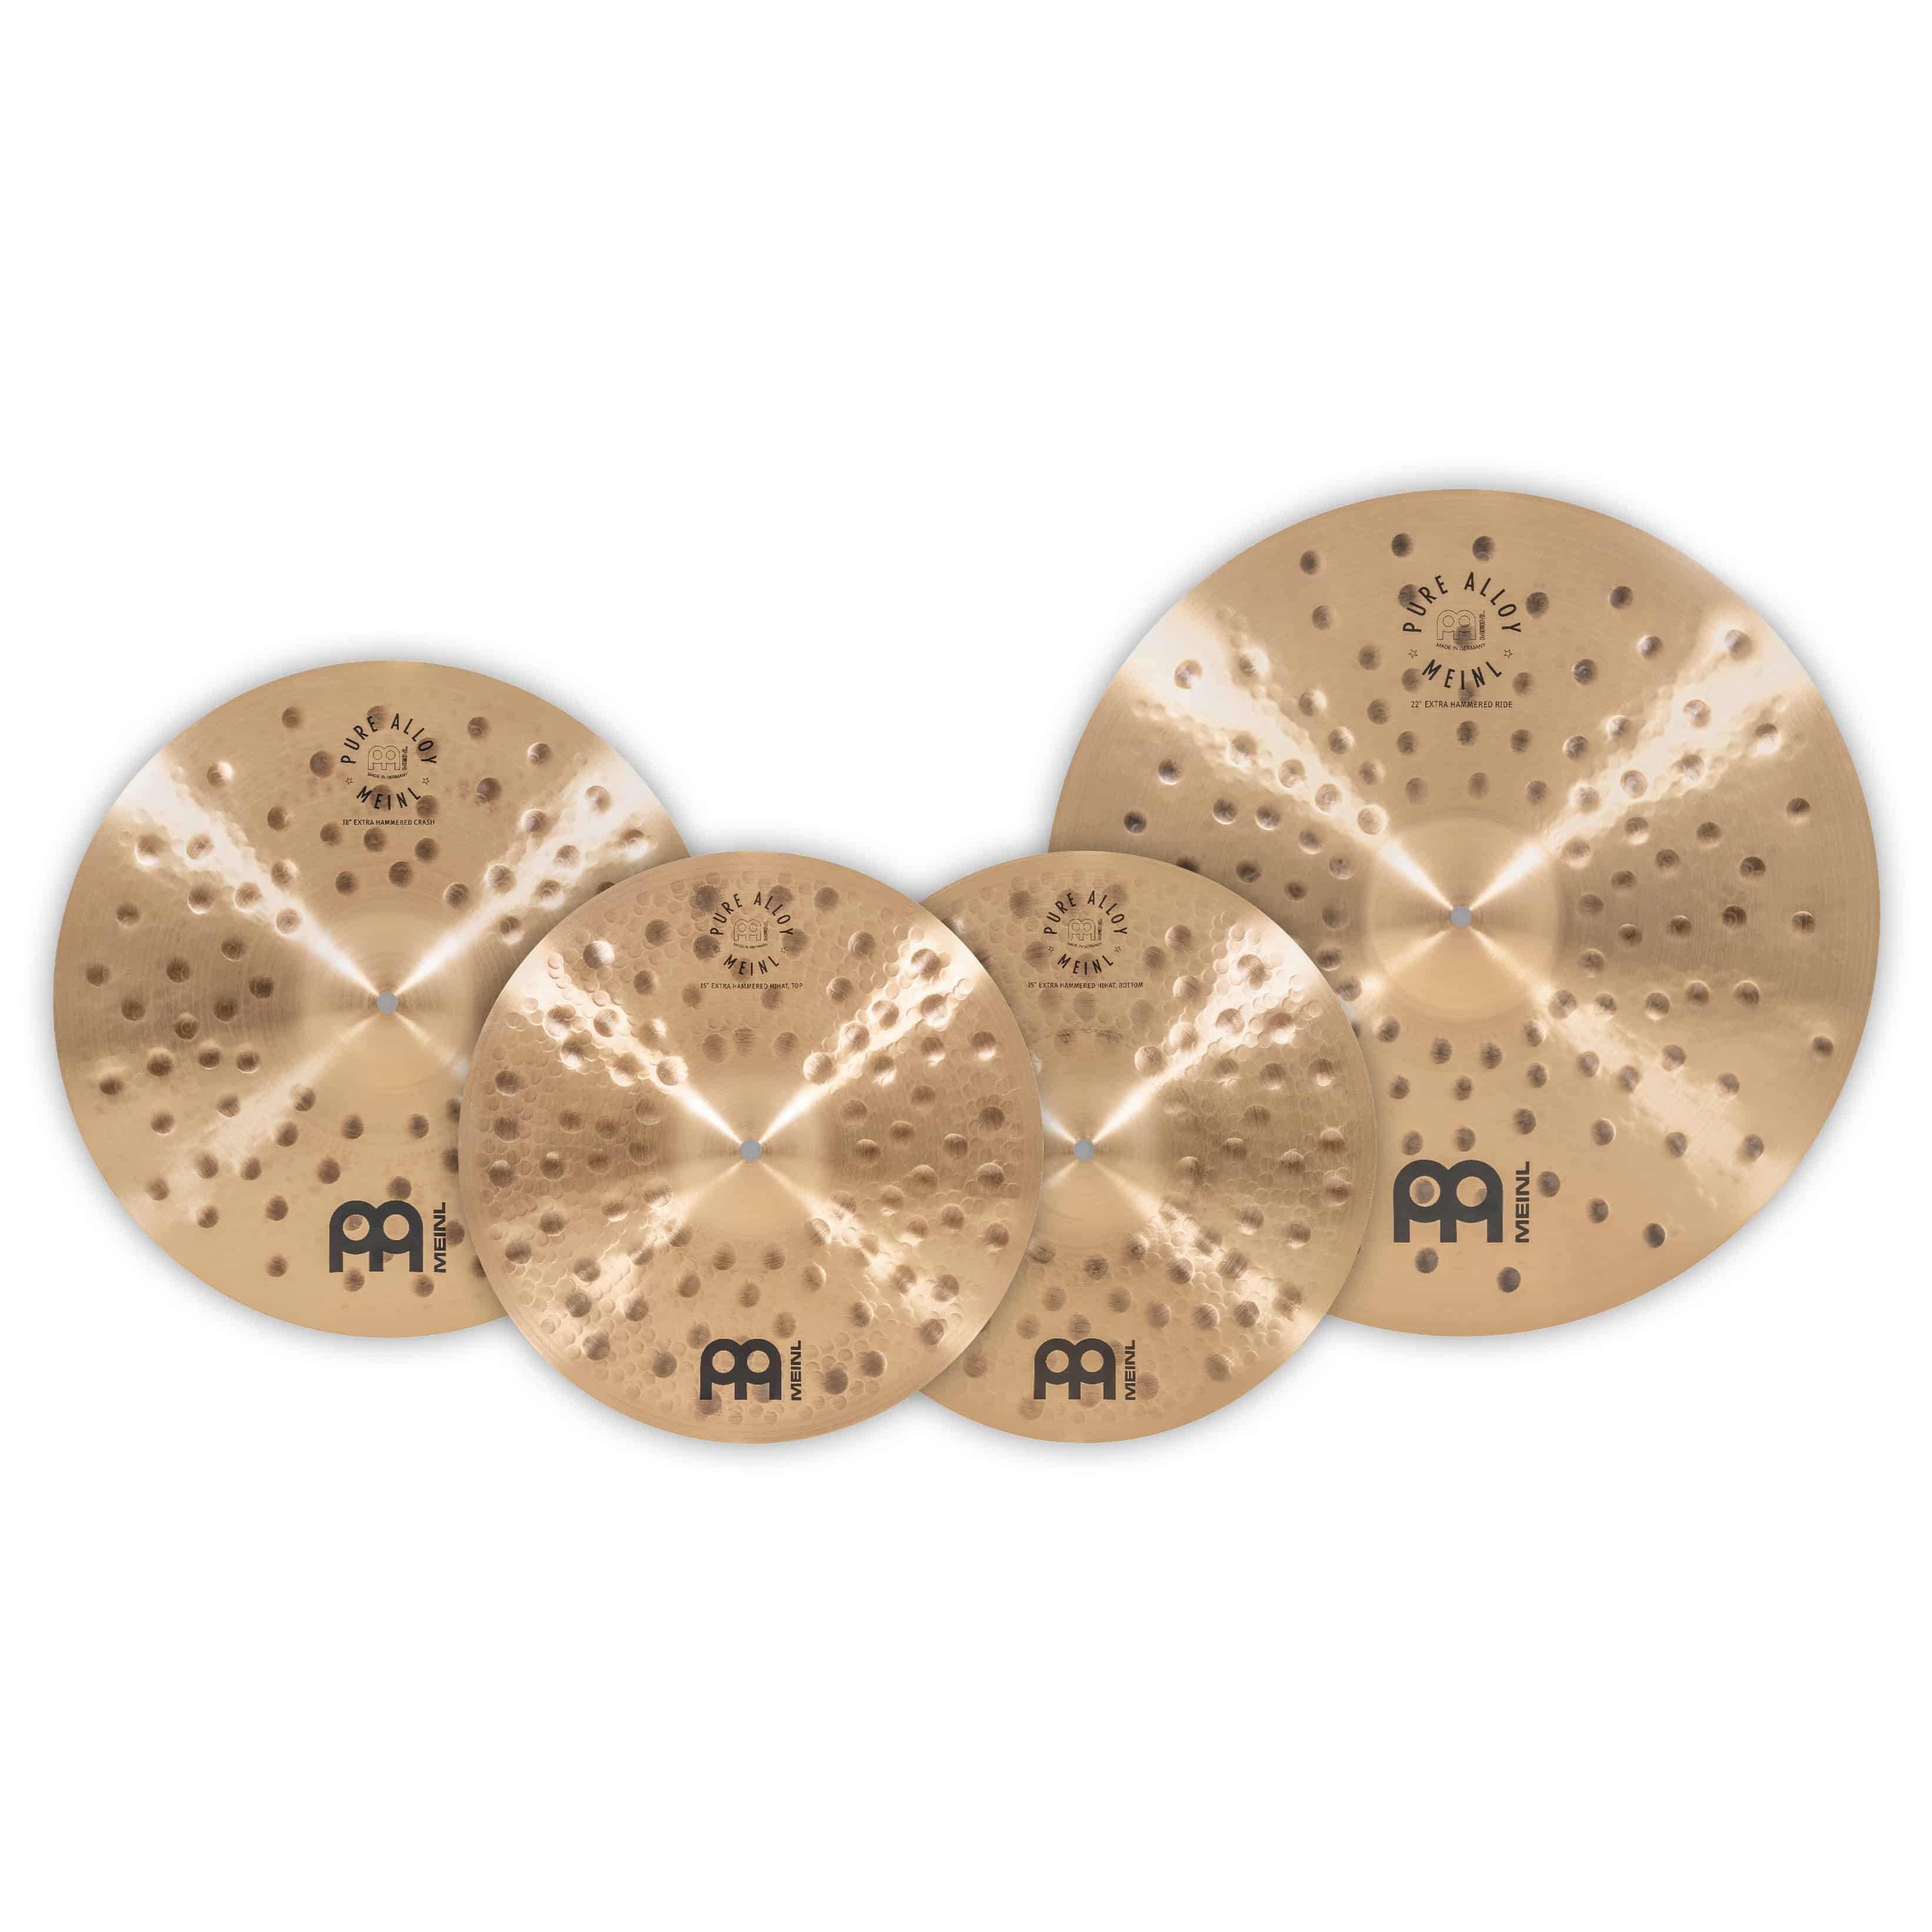 Meinl Cymbals PA-CS1 - Pure Alloy Complete Cymbal Set